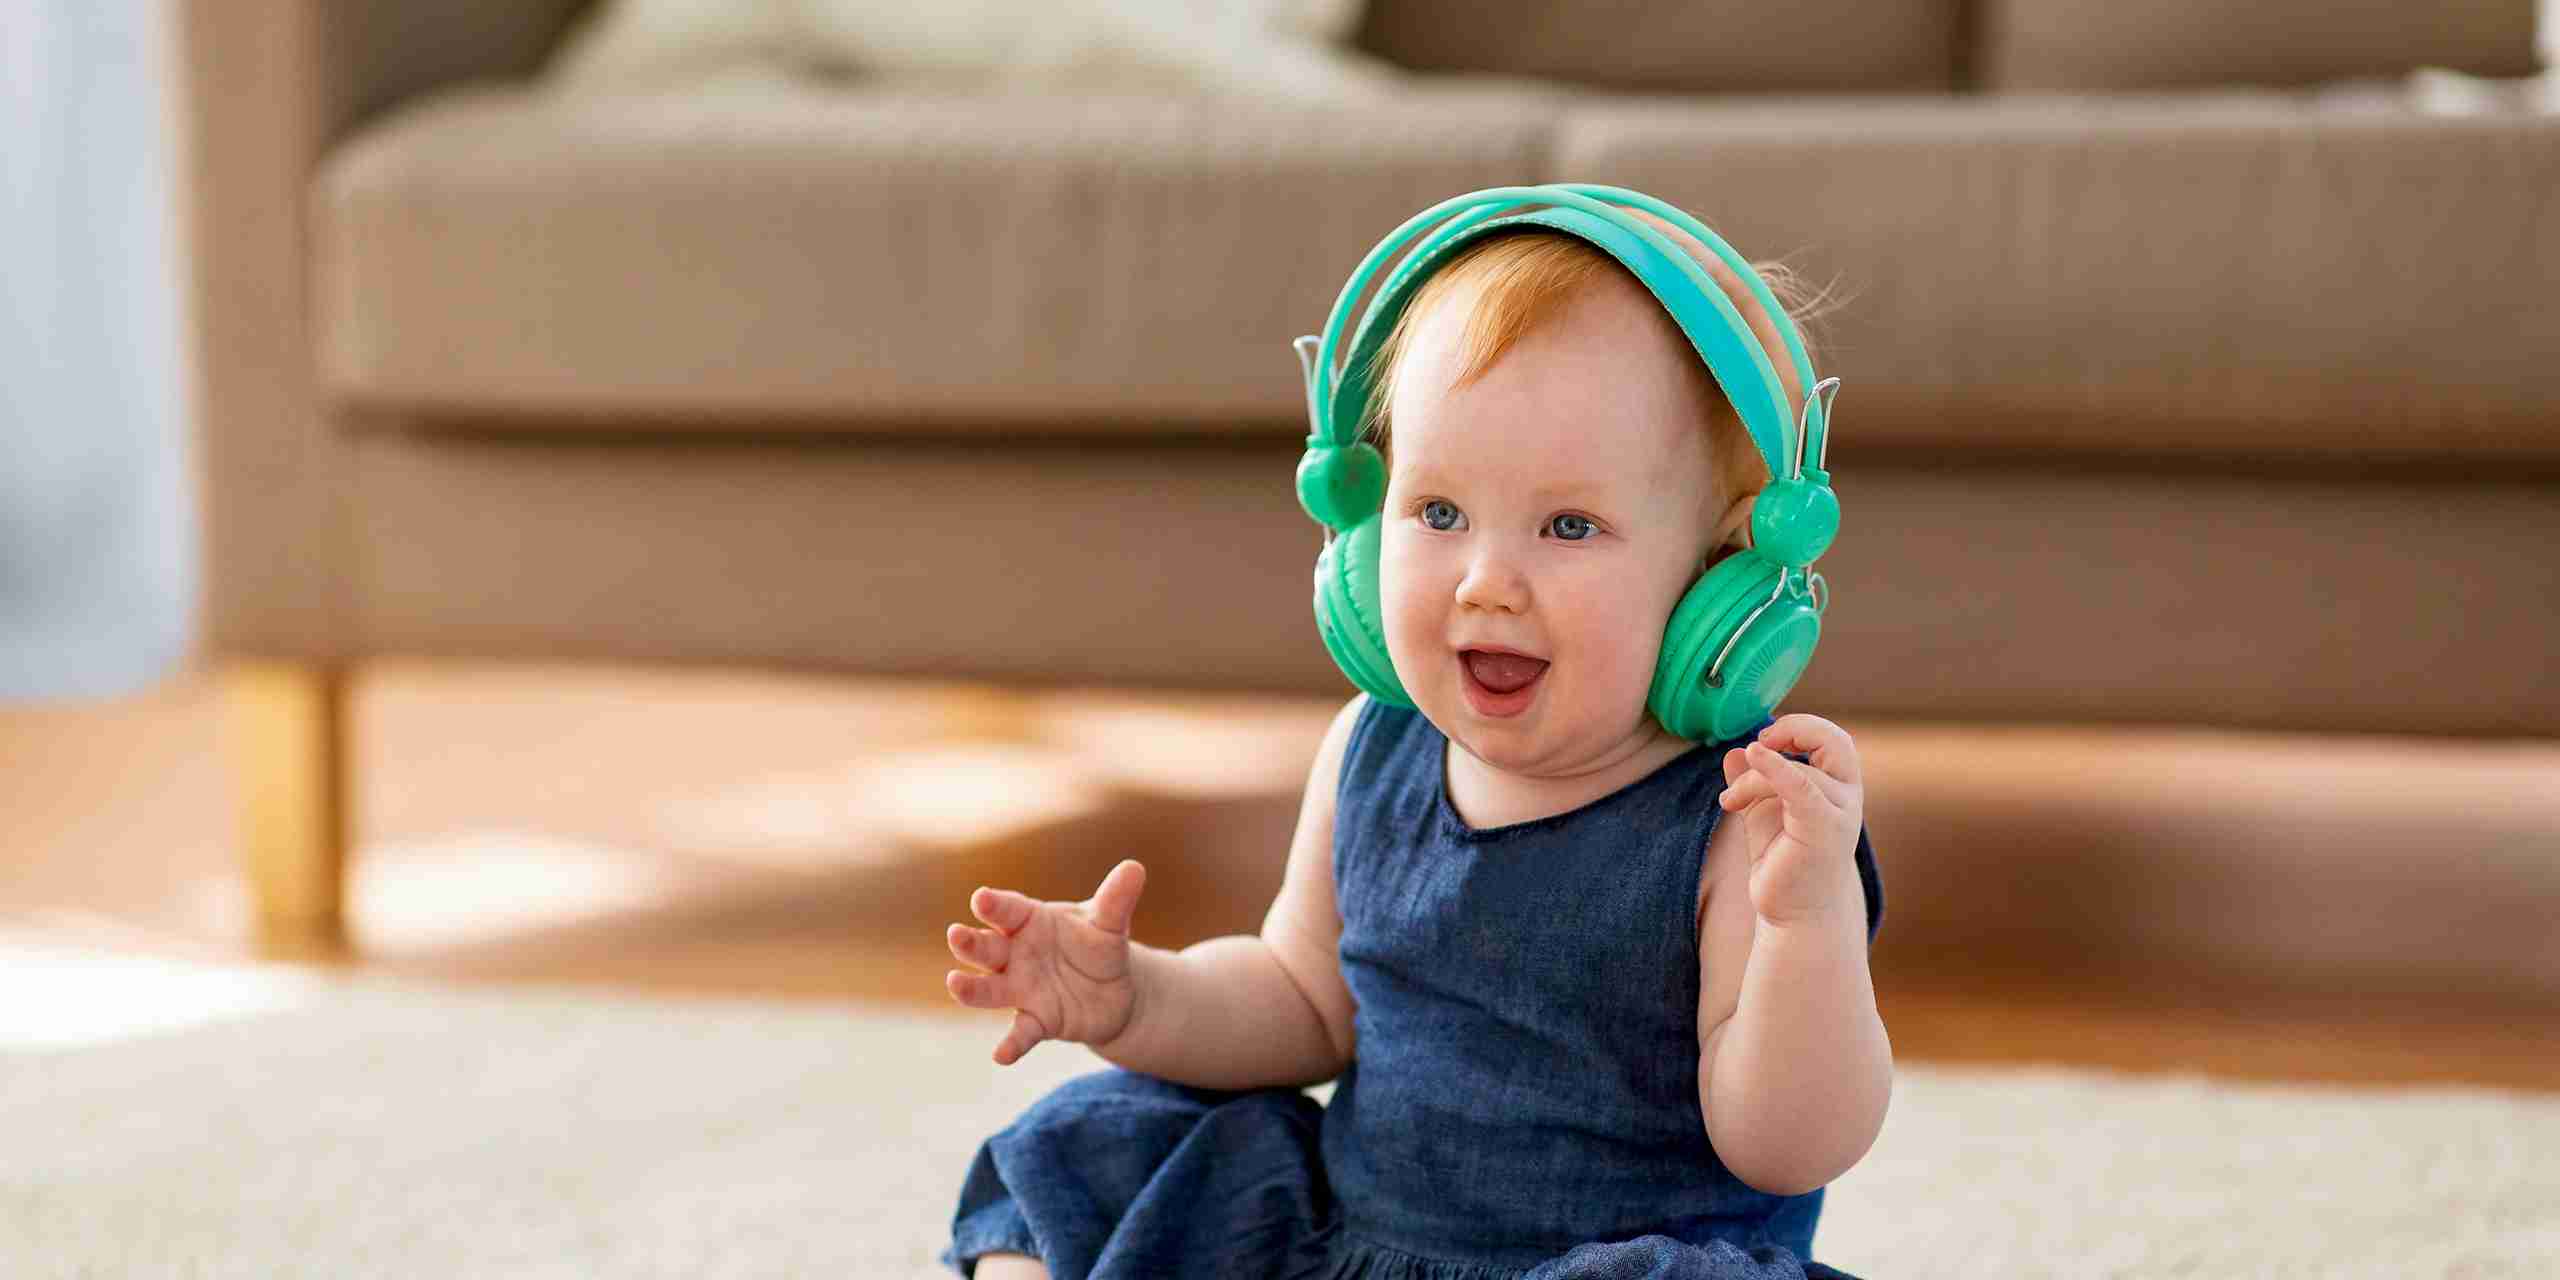 Ear phone usage in children or not